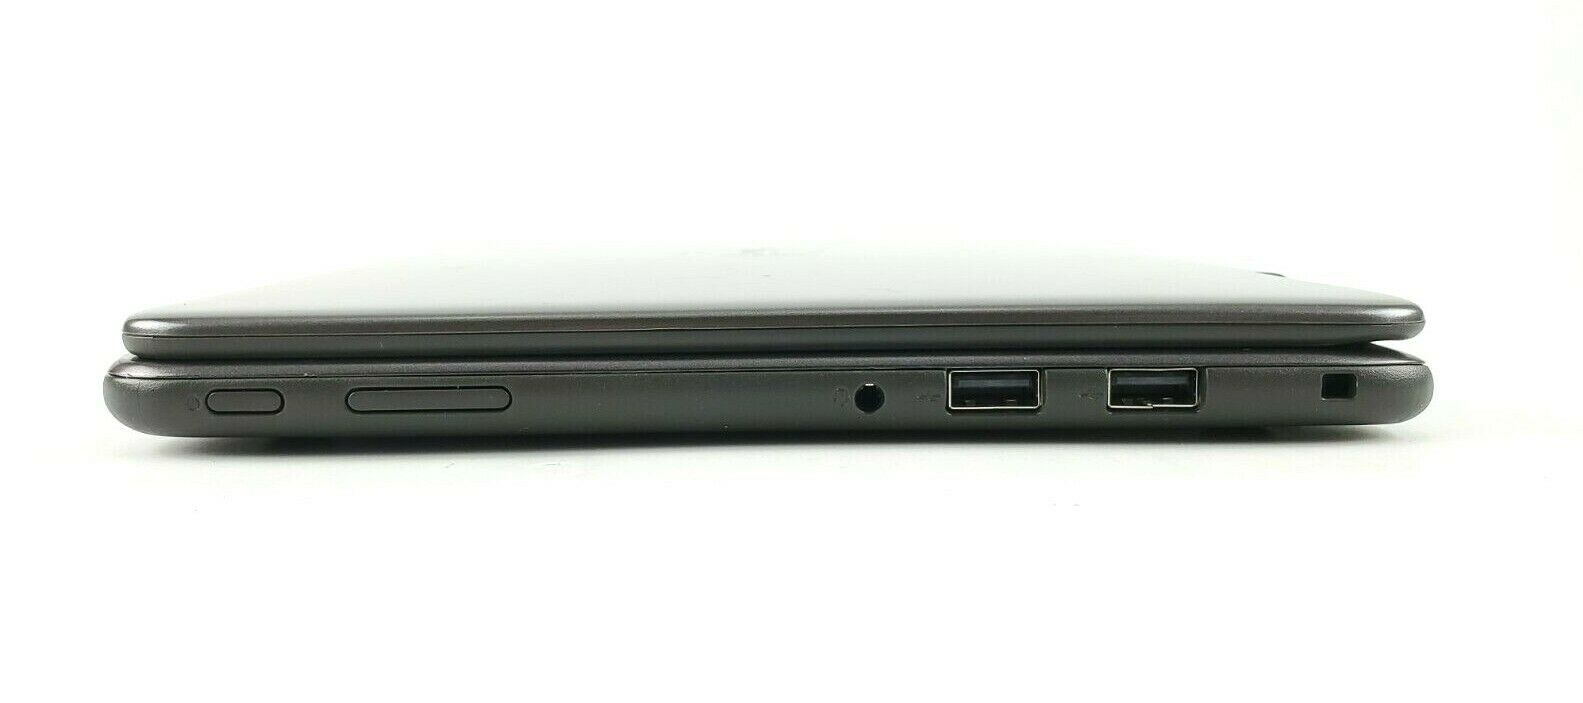 Dell Inspiron 11 3180 - 04 - side1